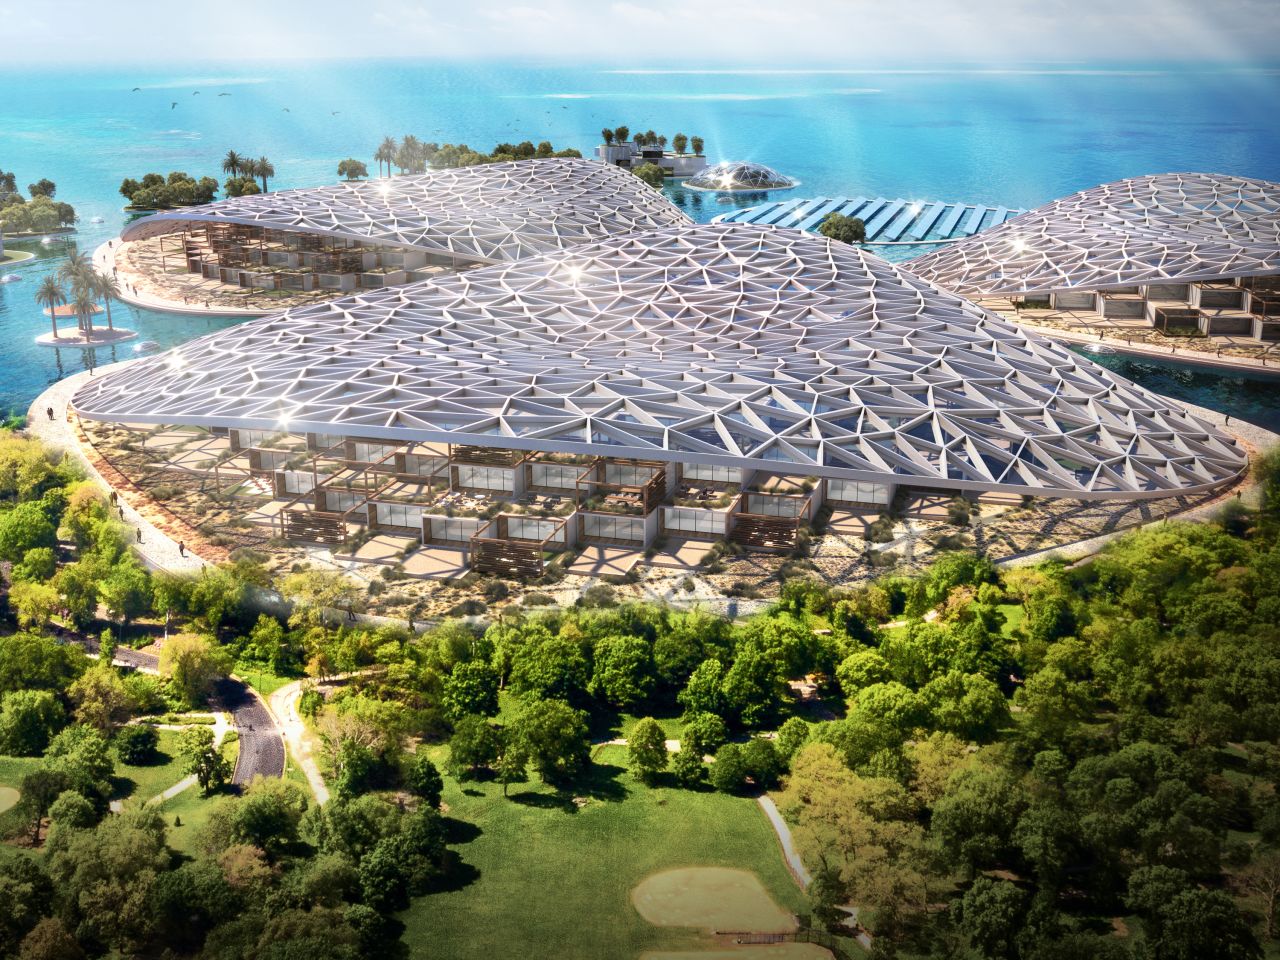 Dubai Reefs, shown in this rendering, aims to be an eco-tourism attraction as well as creating underwater ecosytems.